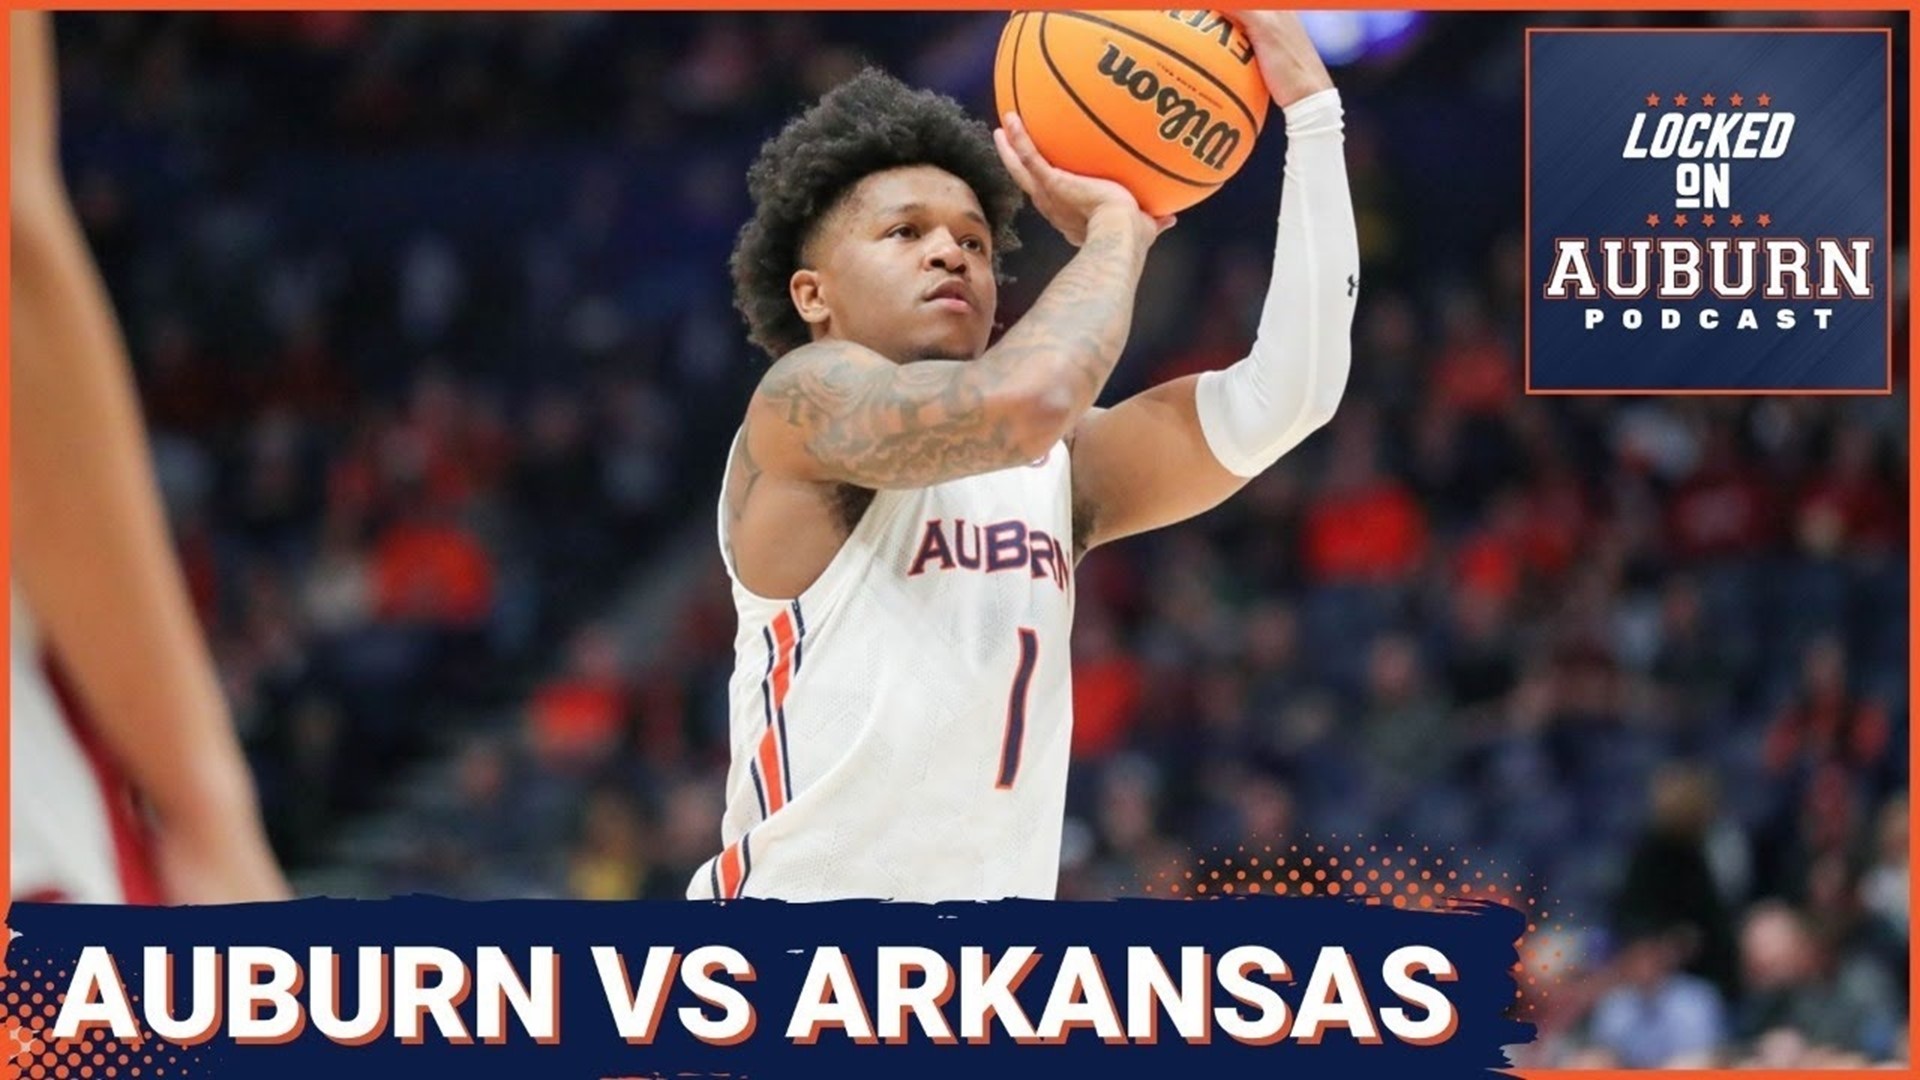 Bruce Pearl and the Auburn basketball team took on the Arkansas Razorbacks in the second round of the SEC Tournament.